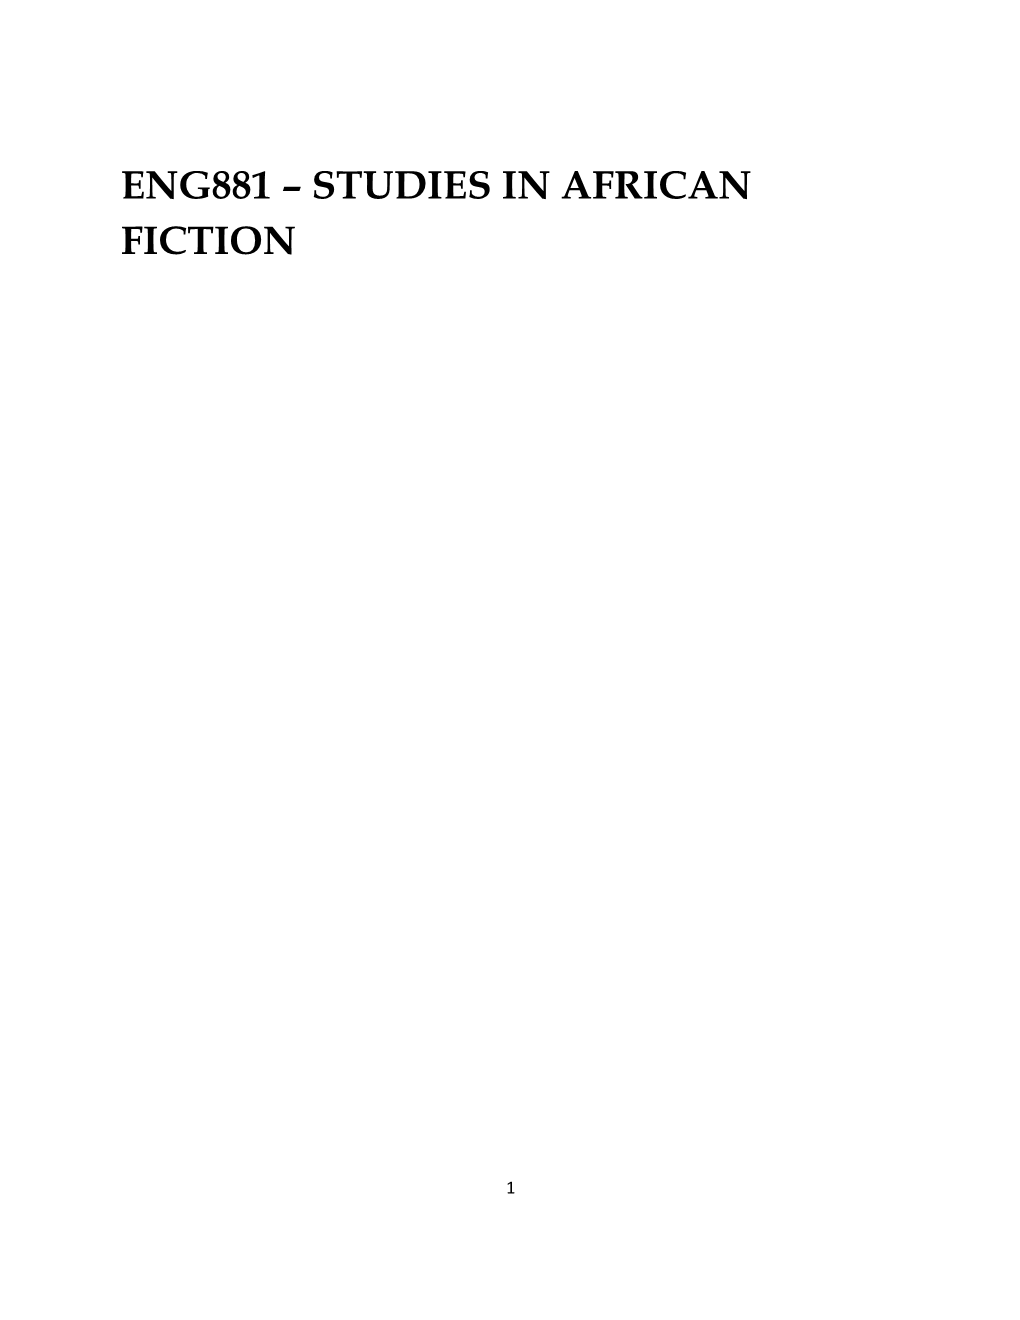 Eng881 – Studies in African Fiction